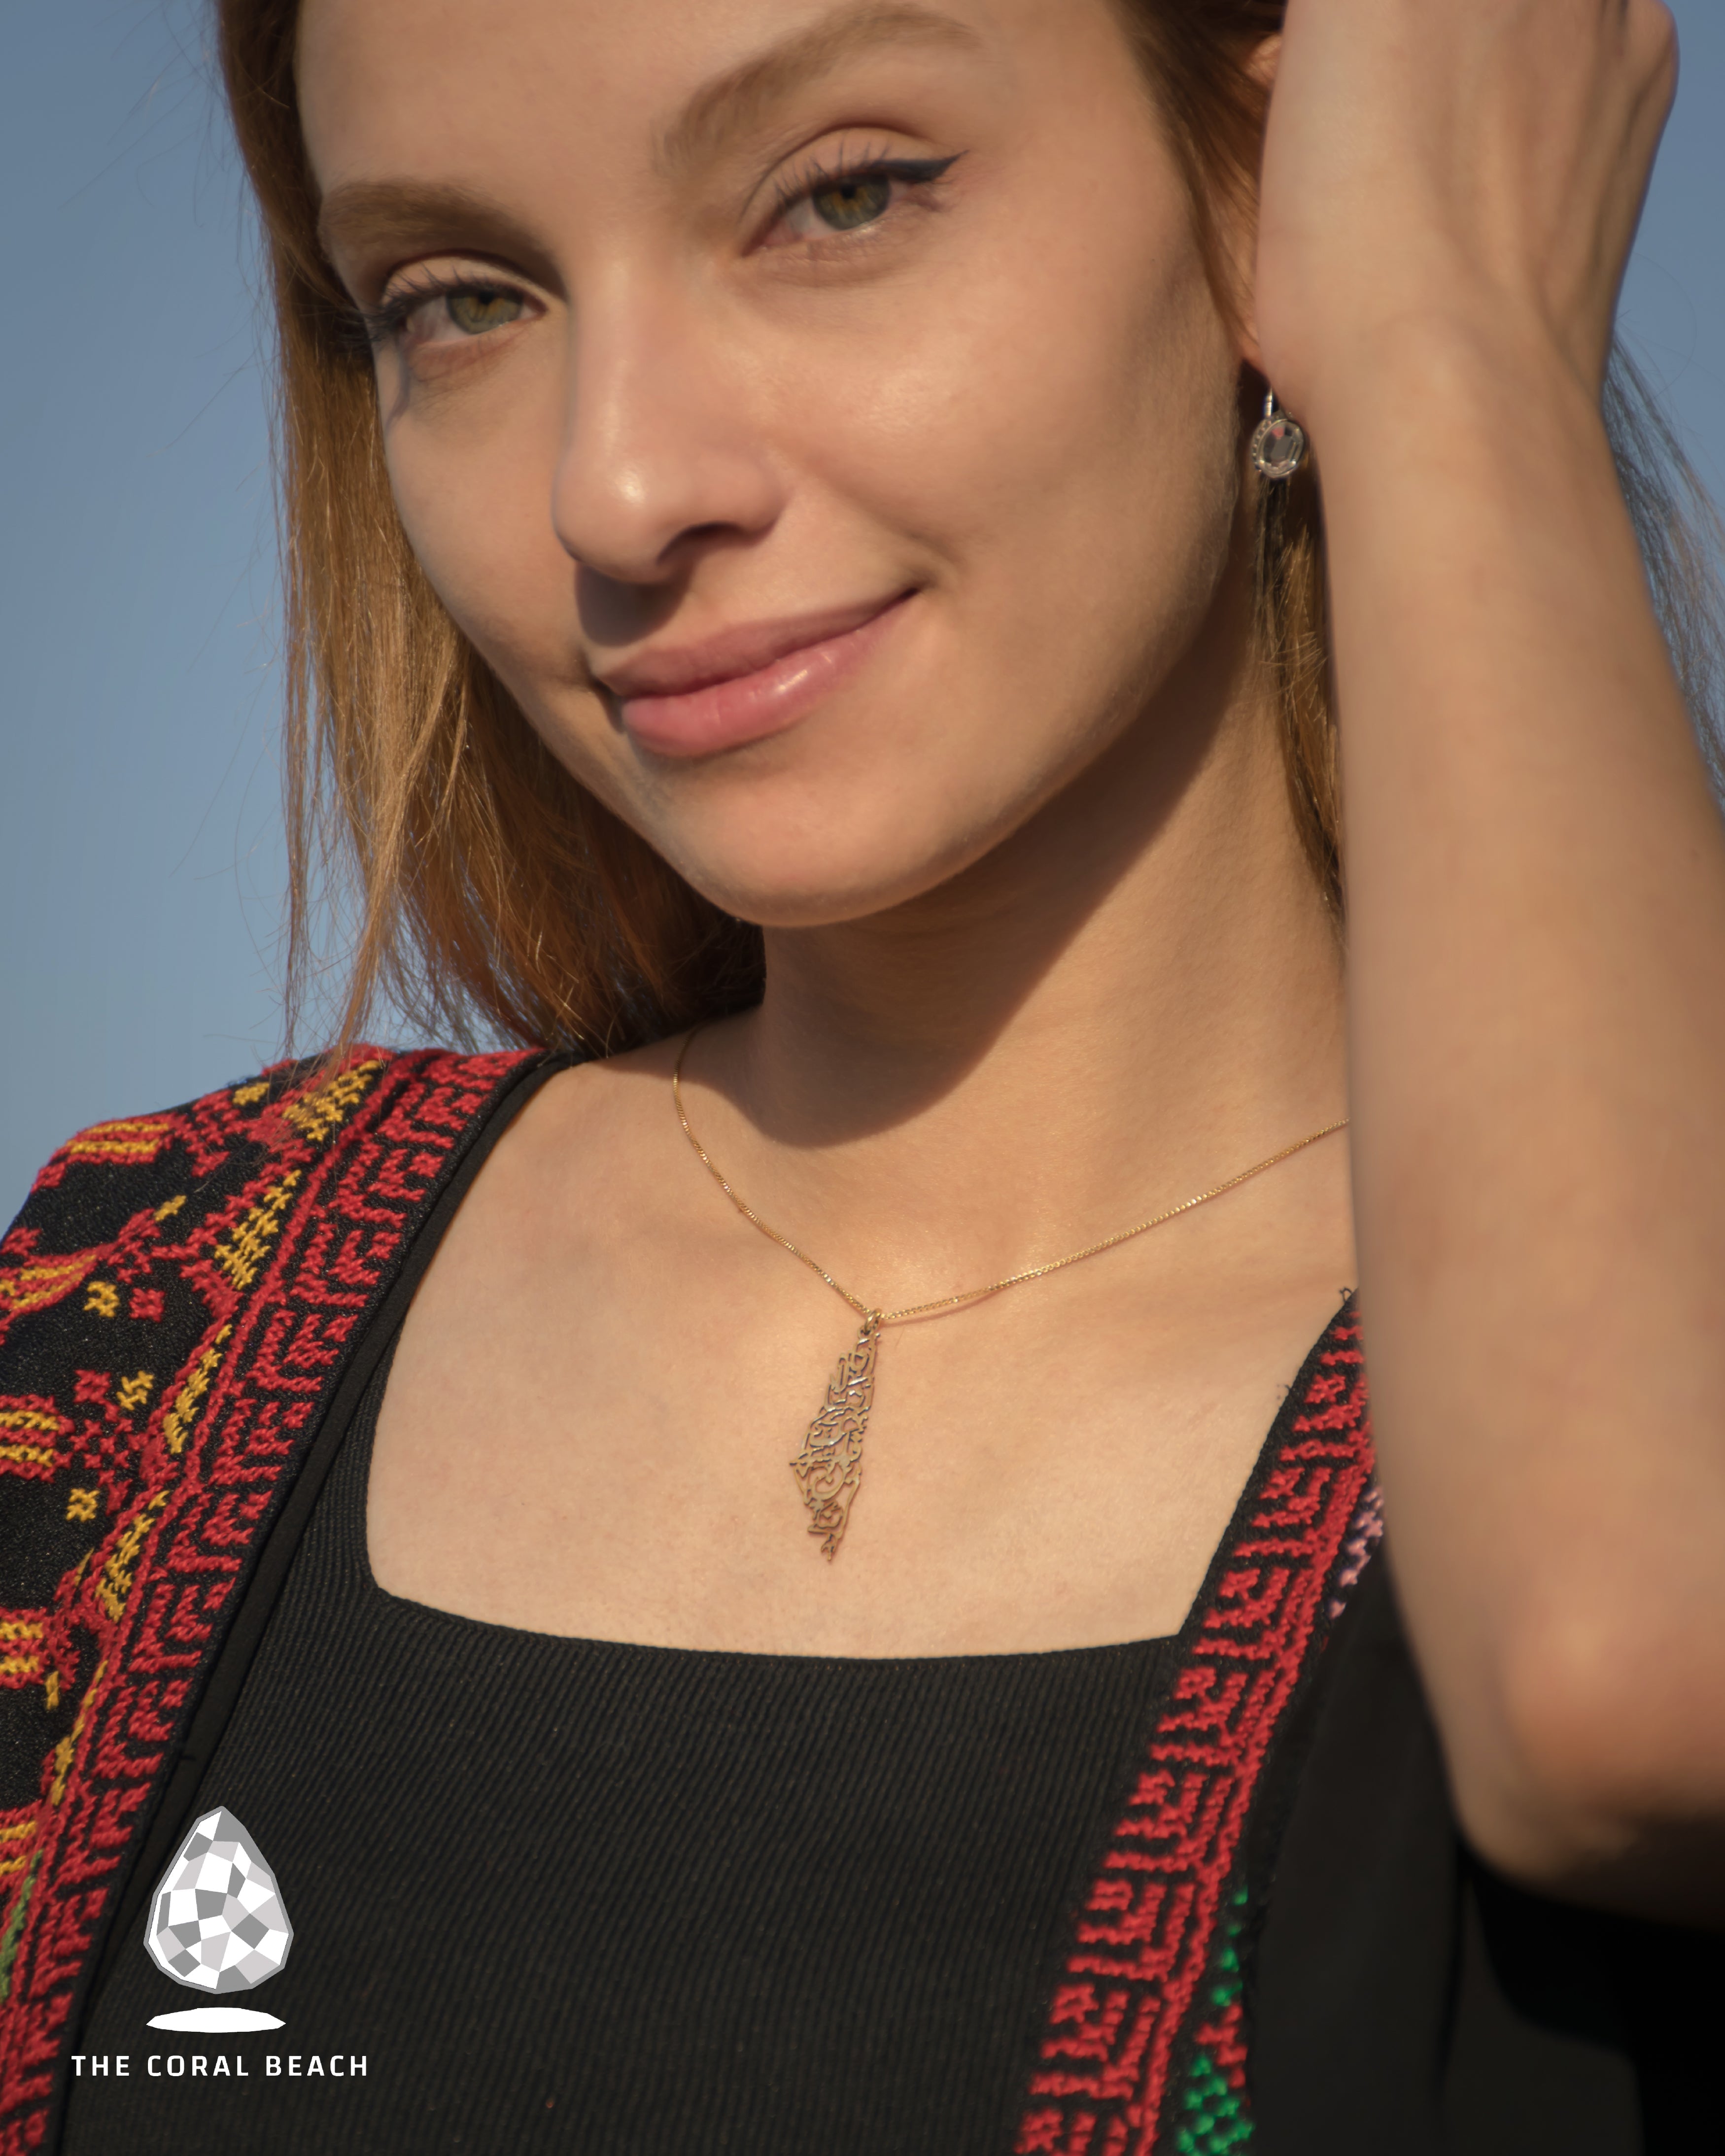 Palestine map with Palestinian famous song written inside necklace